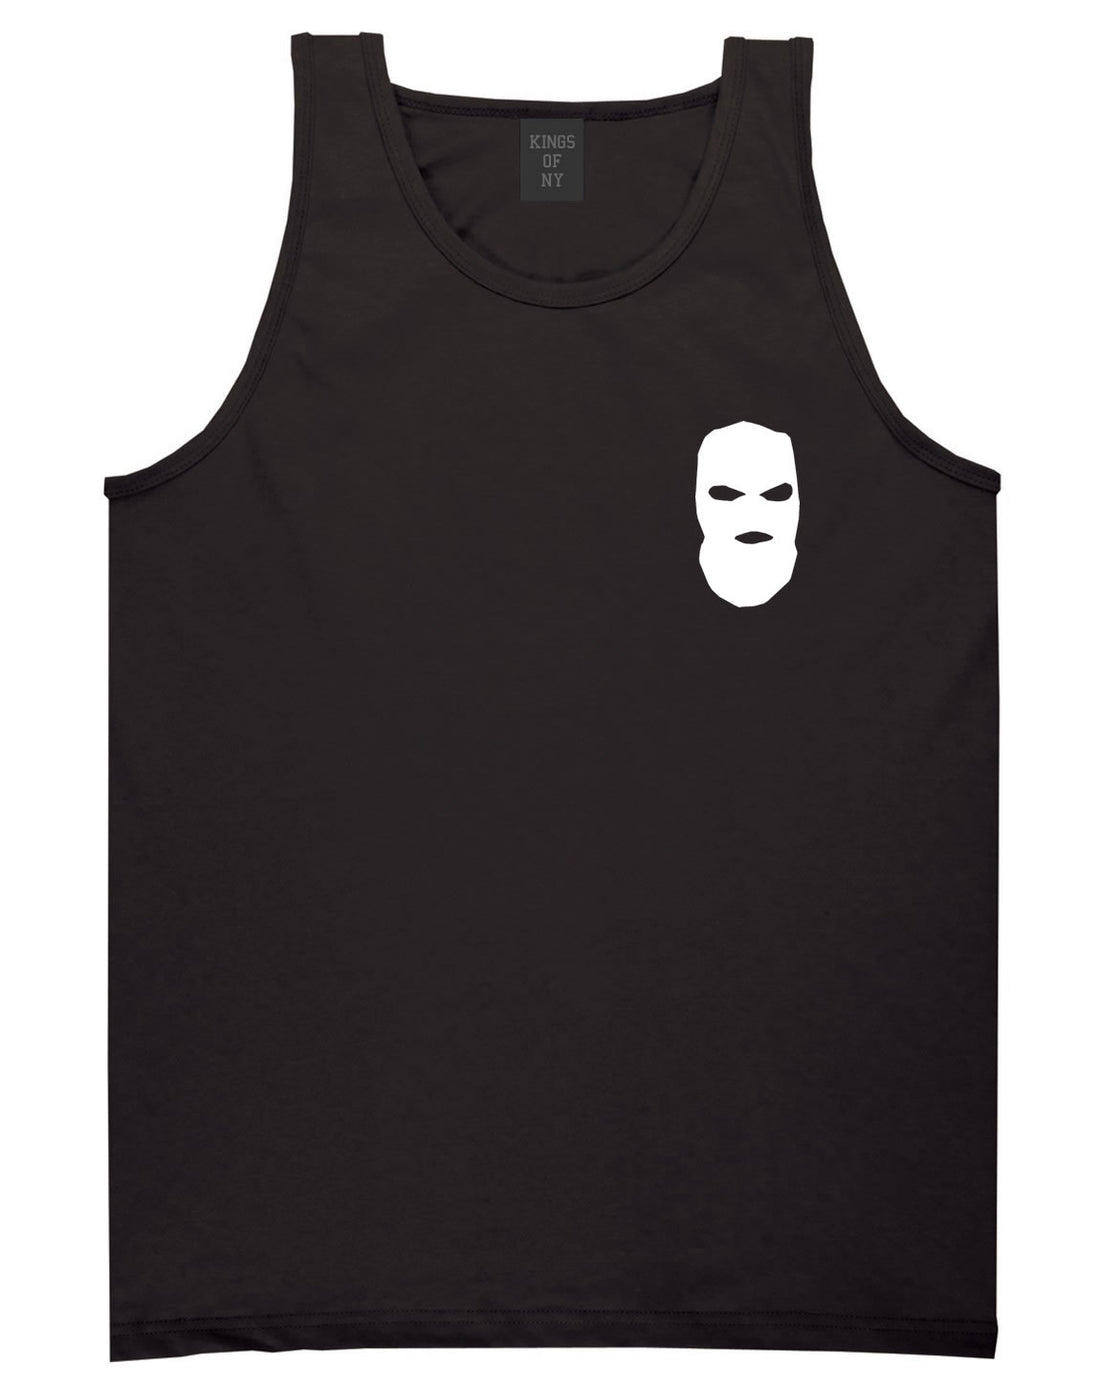 Ski Mask Way Robber Chest Logo Tank Top in Black By Kings Of NY